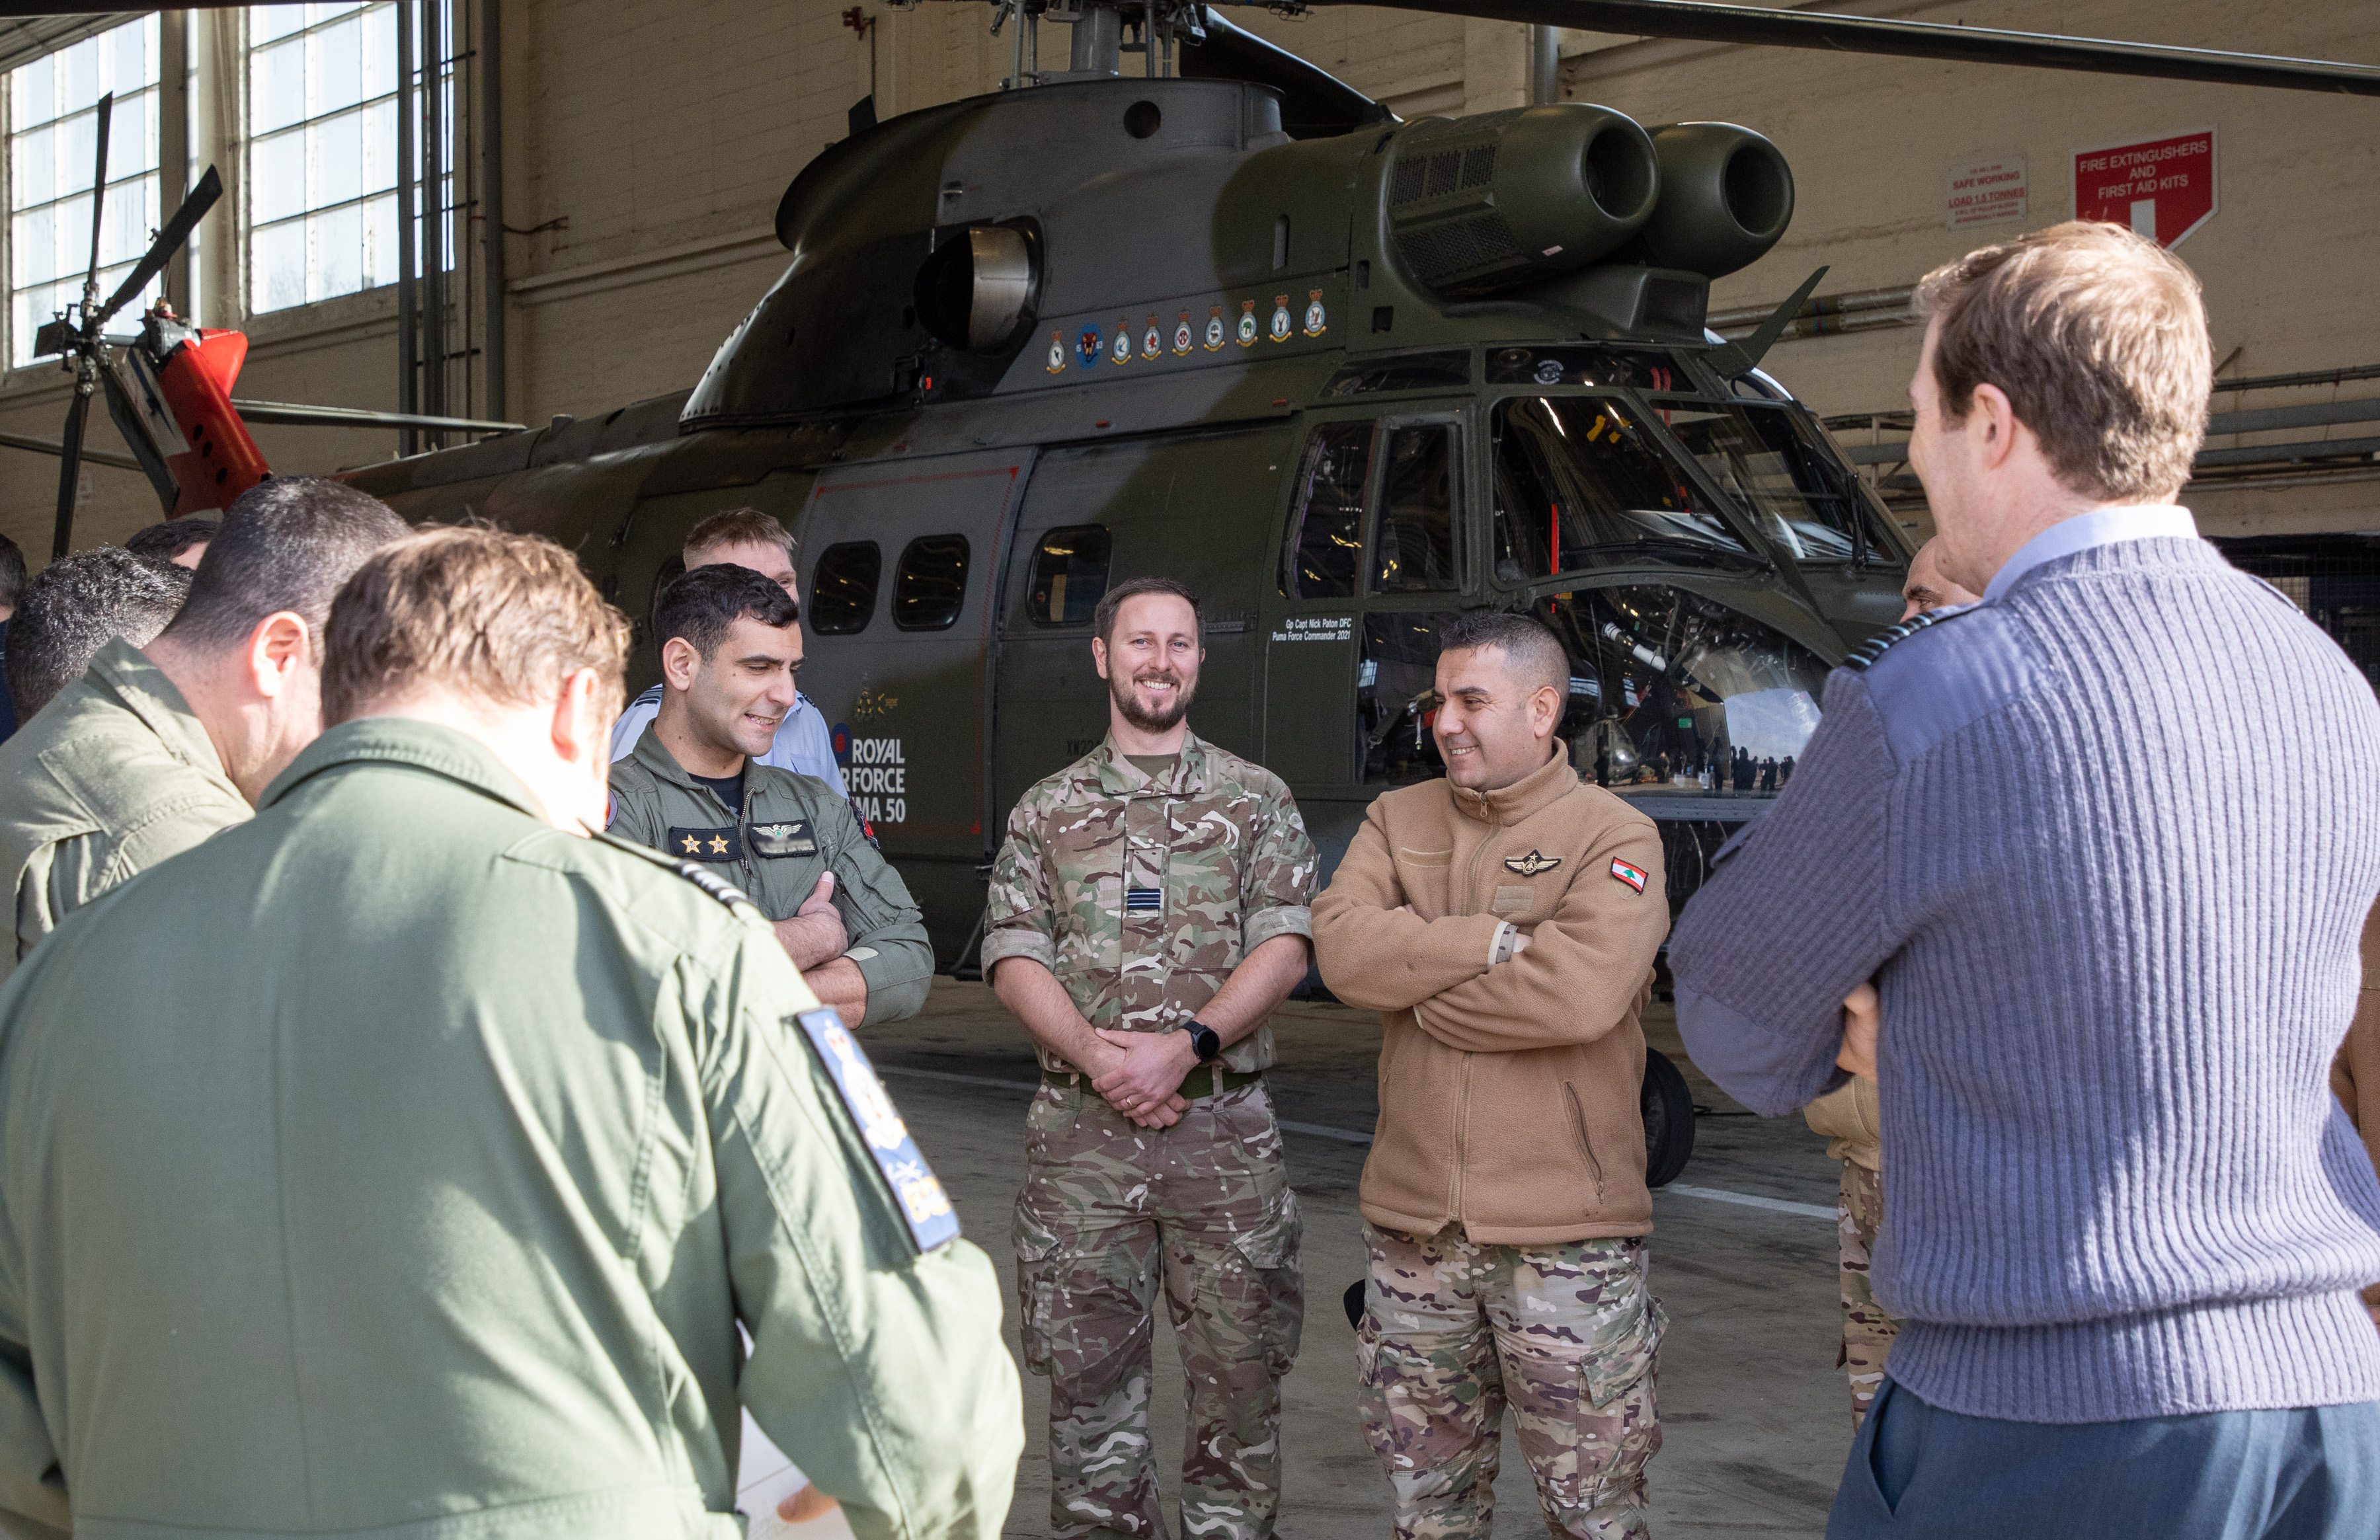 Personnel from both forces chat in the hangar